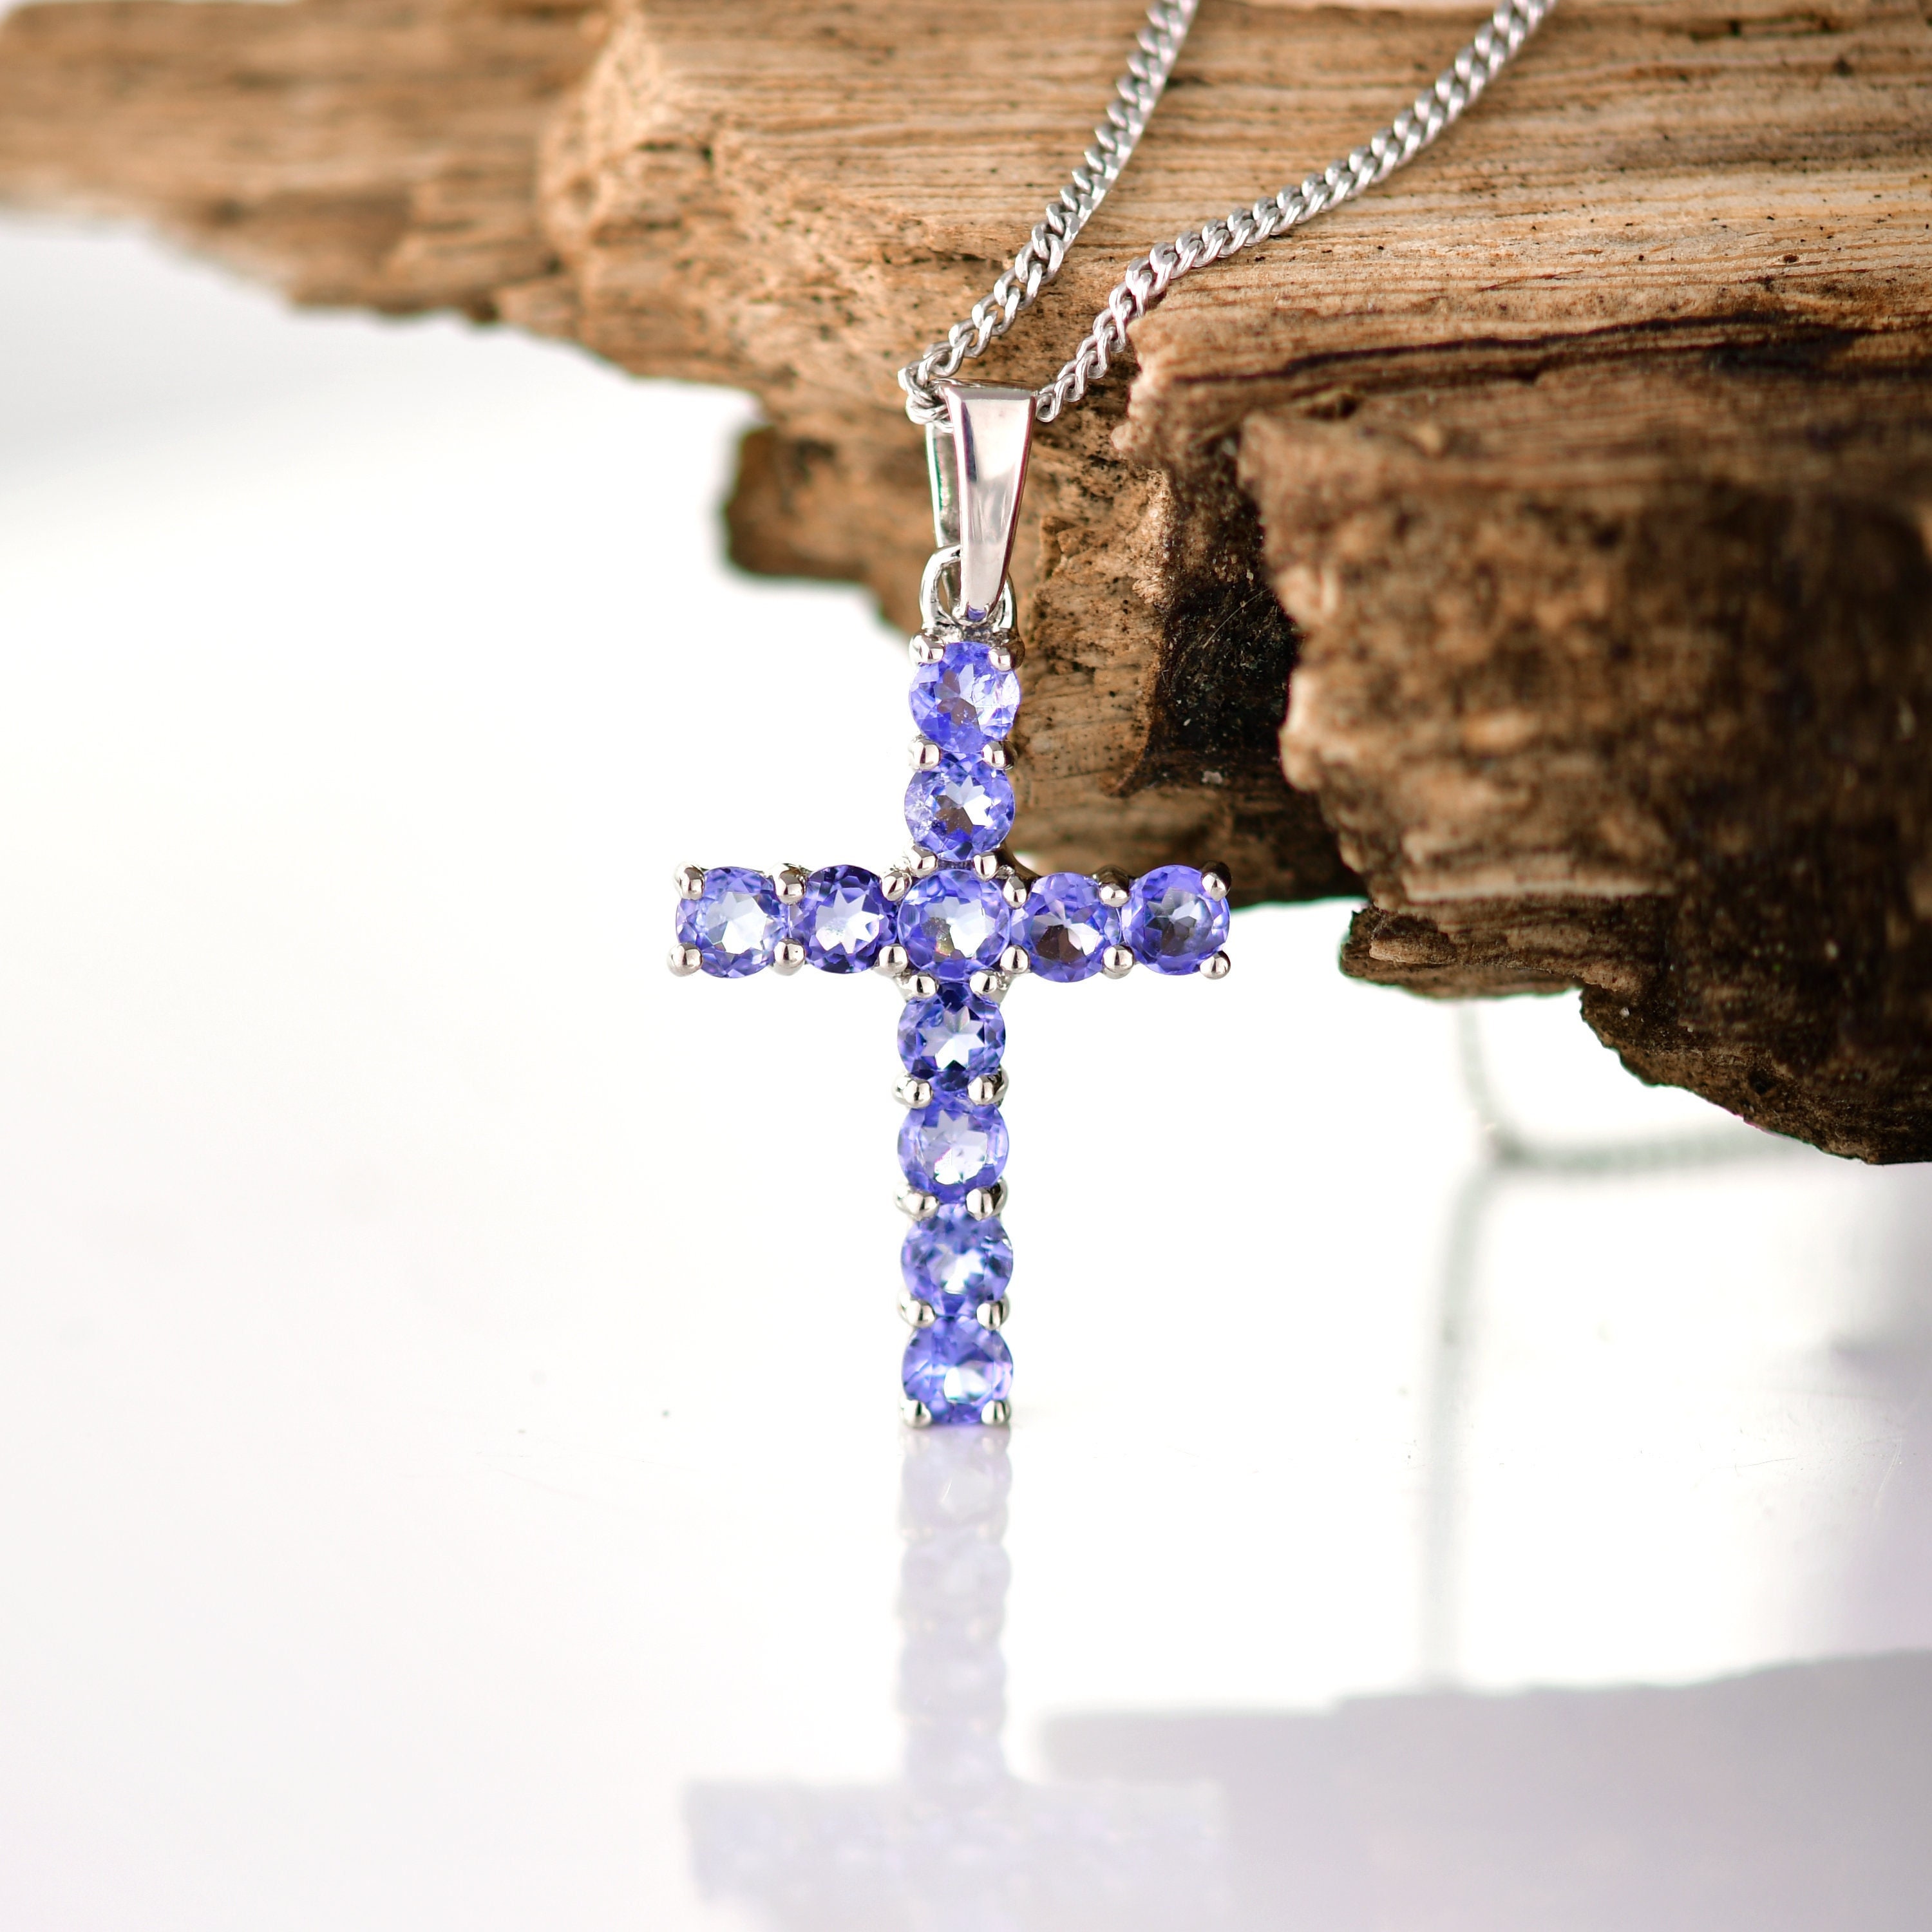 Buy Sterling Silver Natural Tanzanite Cross Pendant AAA Fine Tanzanite  Gemstone 925 Silver Fancy Pendant Necklace Gift Ideas for Her SDP02 Online  in India - Etsy